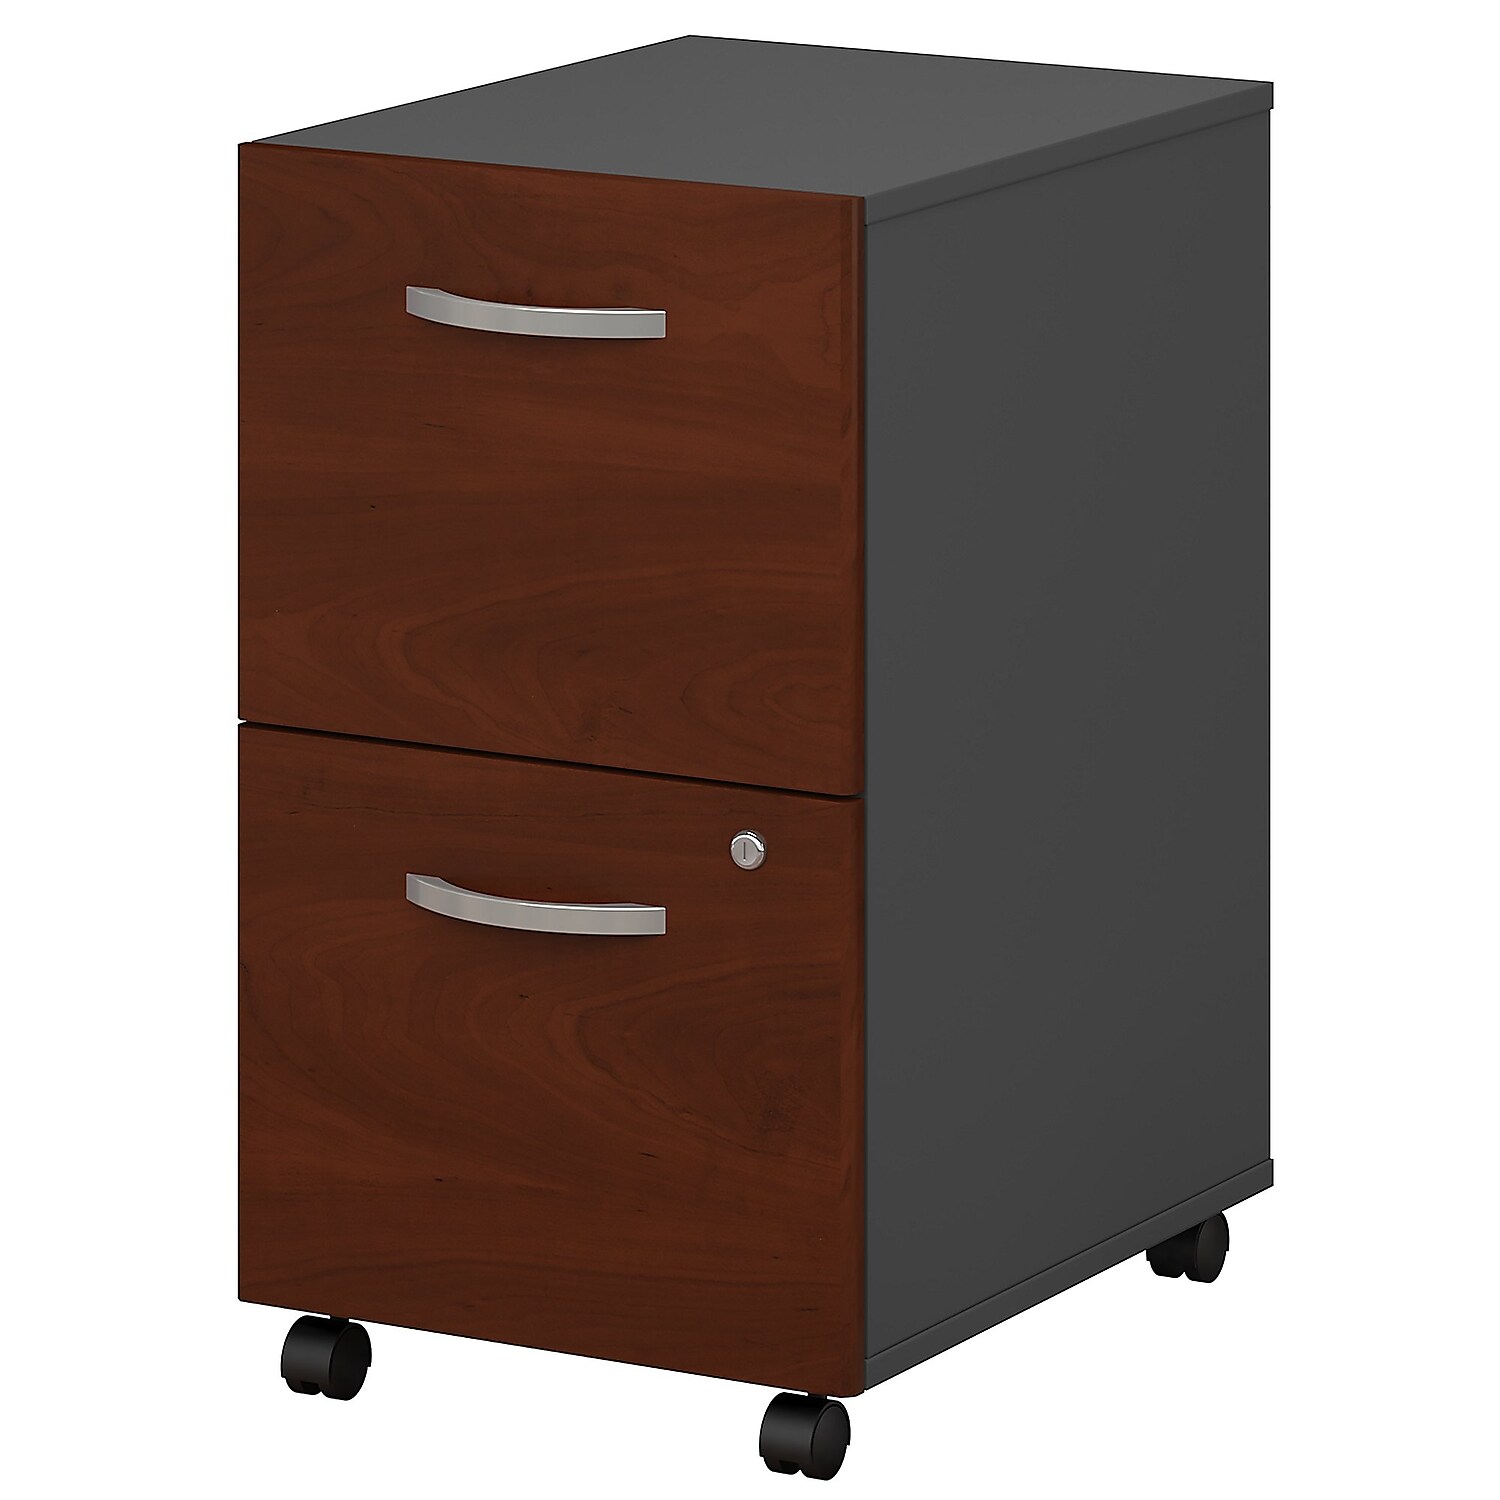 Series C 2 Drawer Mobile File Cabinet in Hansen Cherry - Engineered Wood - image 1 of 8